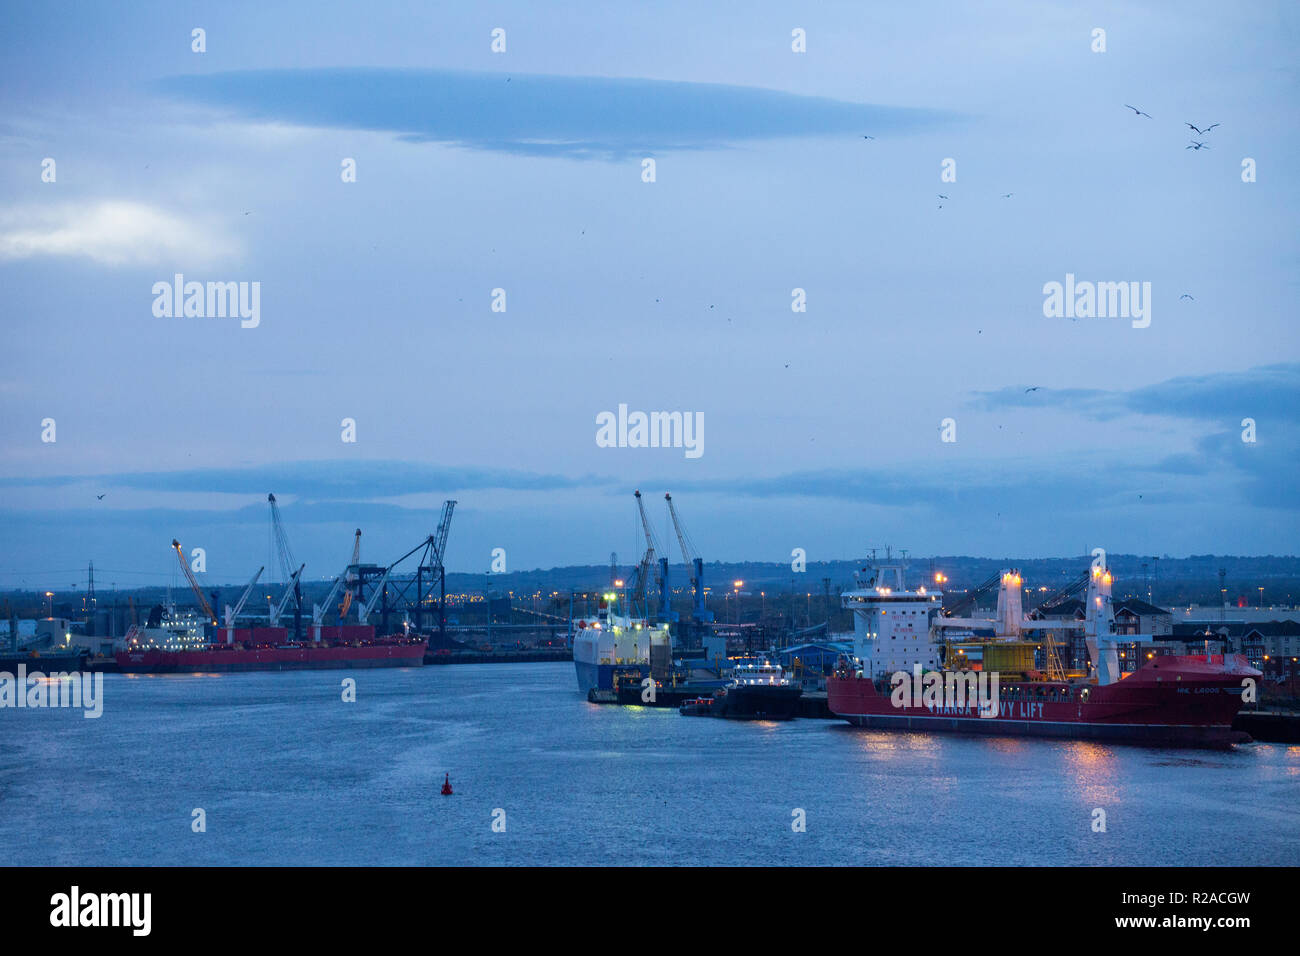 South Shields docks at night. Big ships docked in harbour Stock Photo